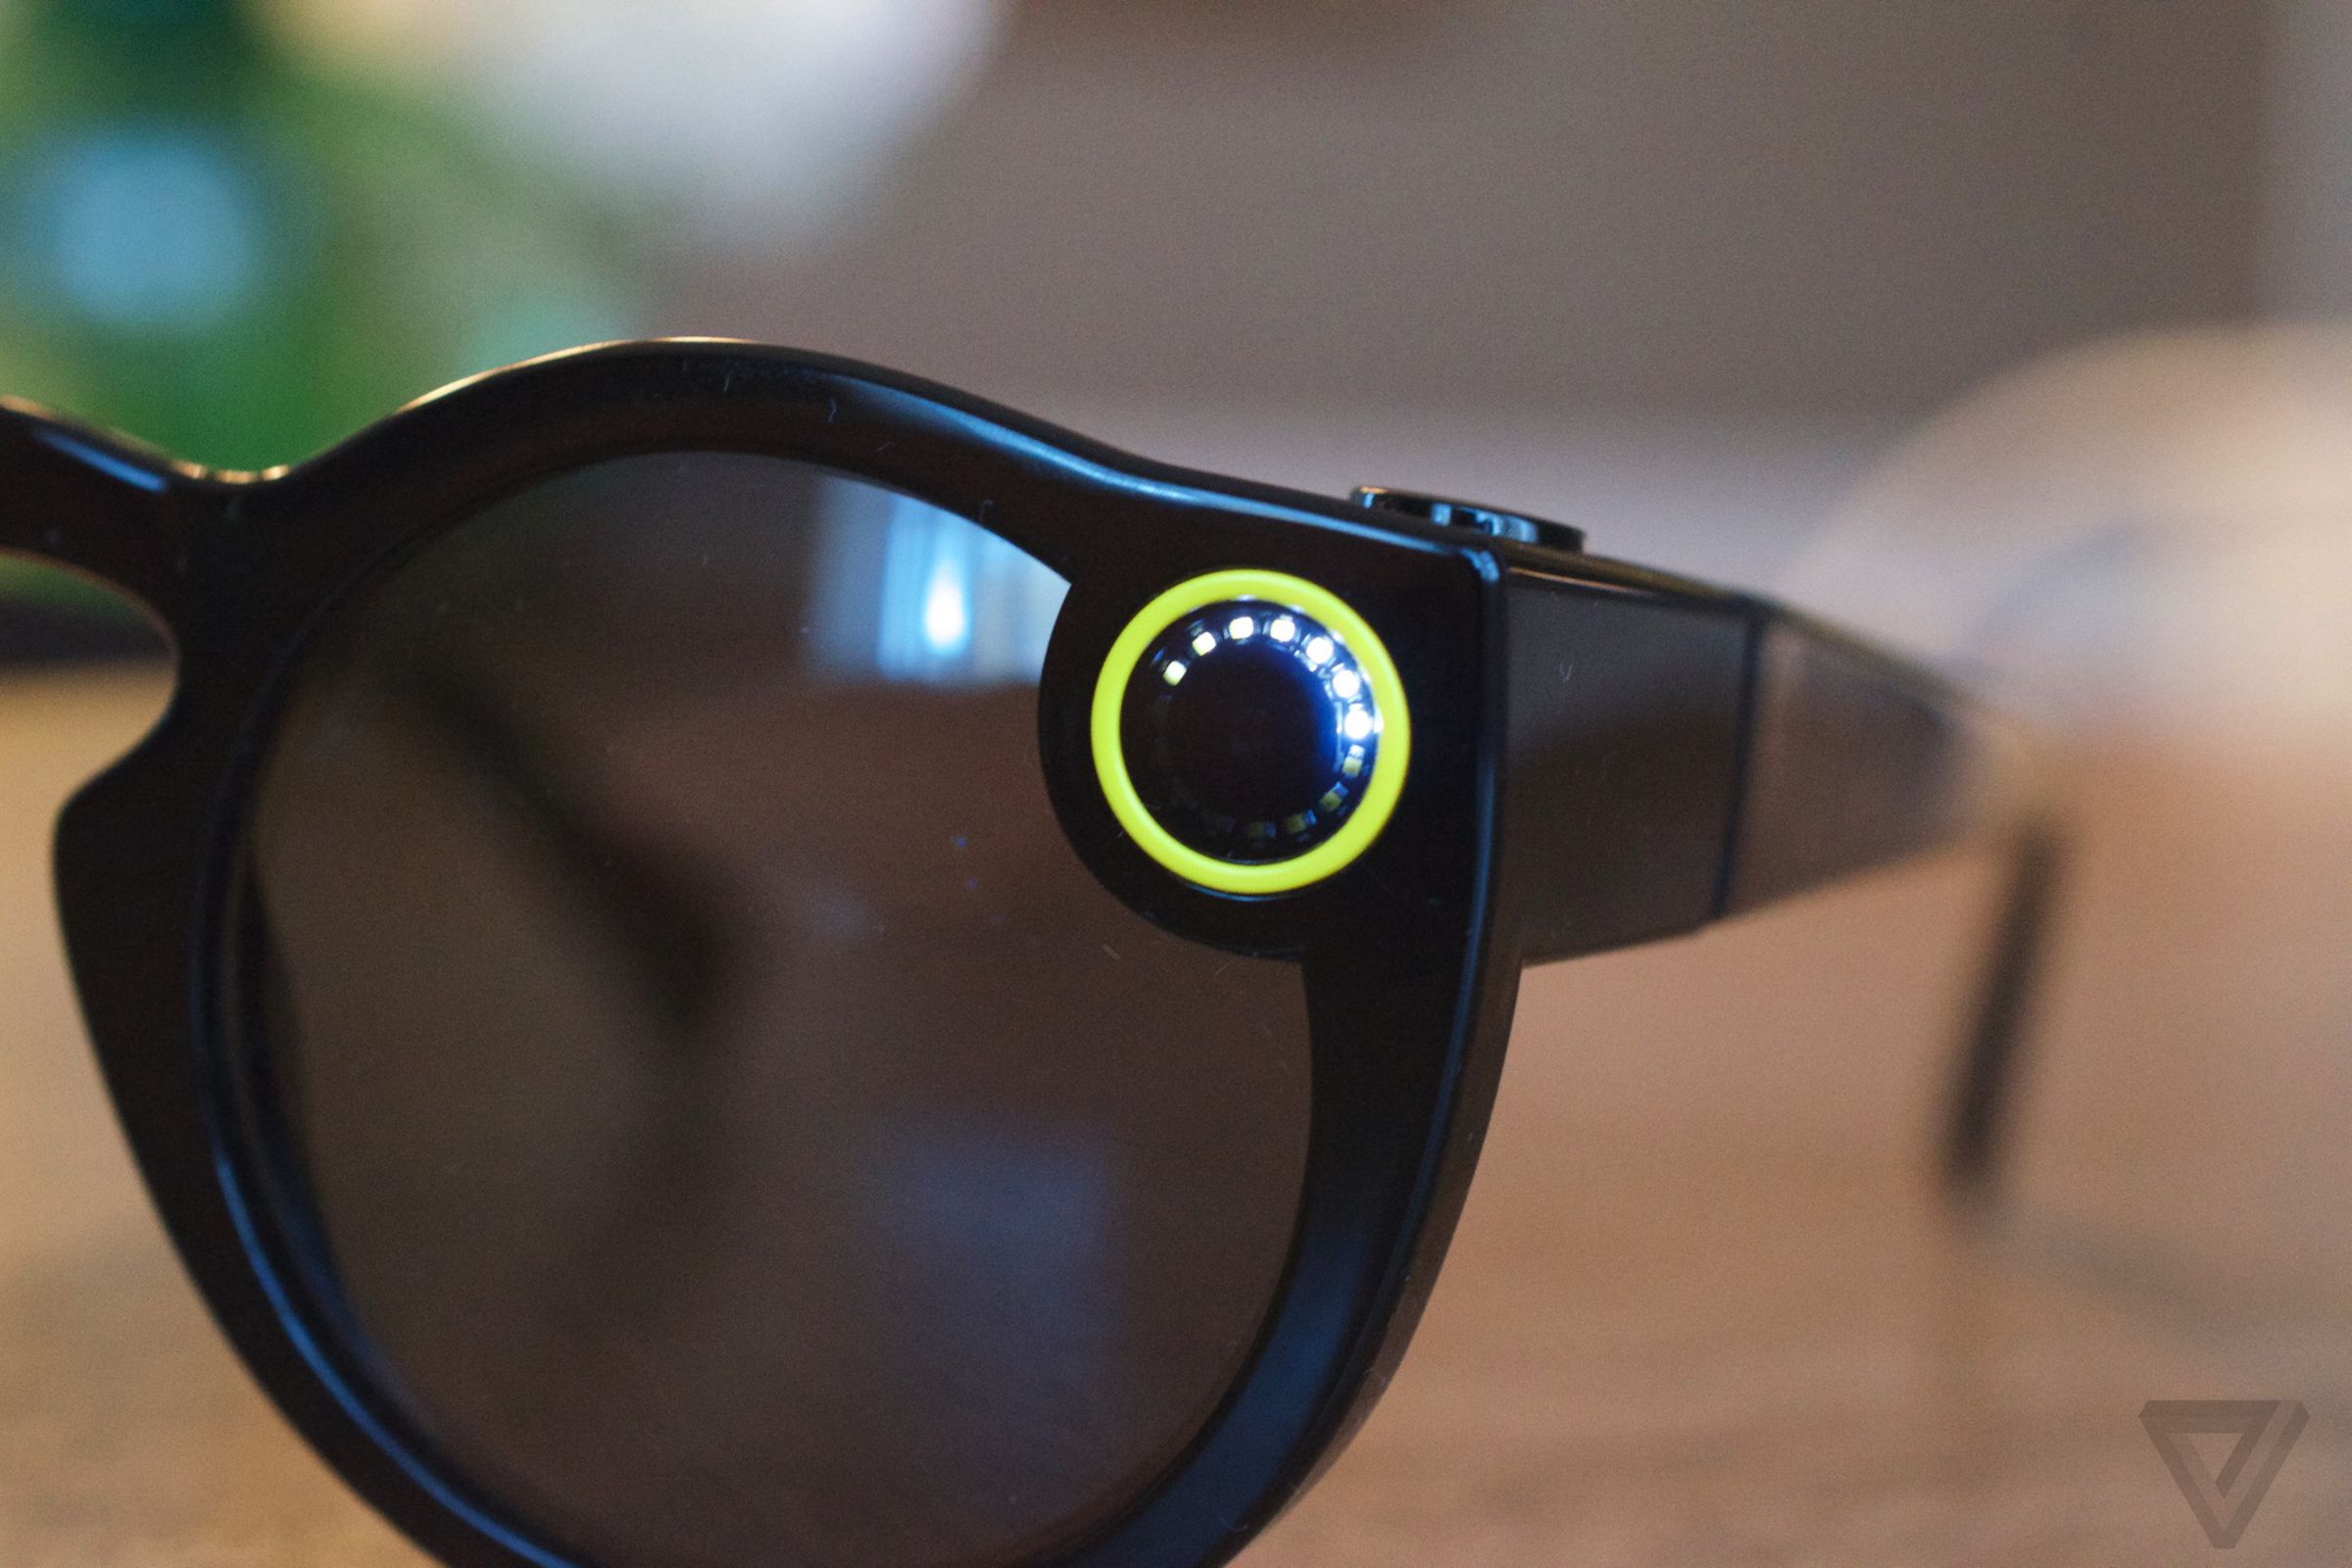 First generation of Spectacles launched in 2016.